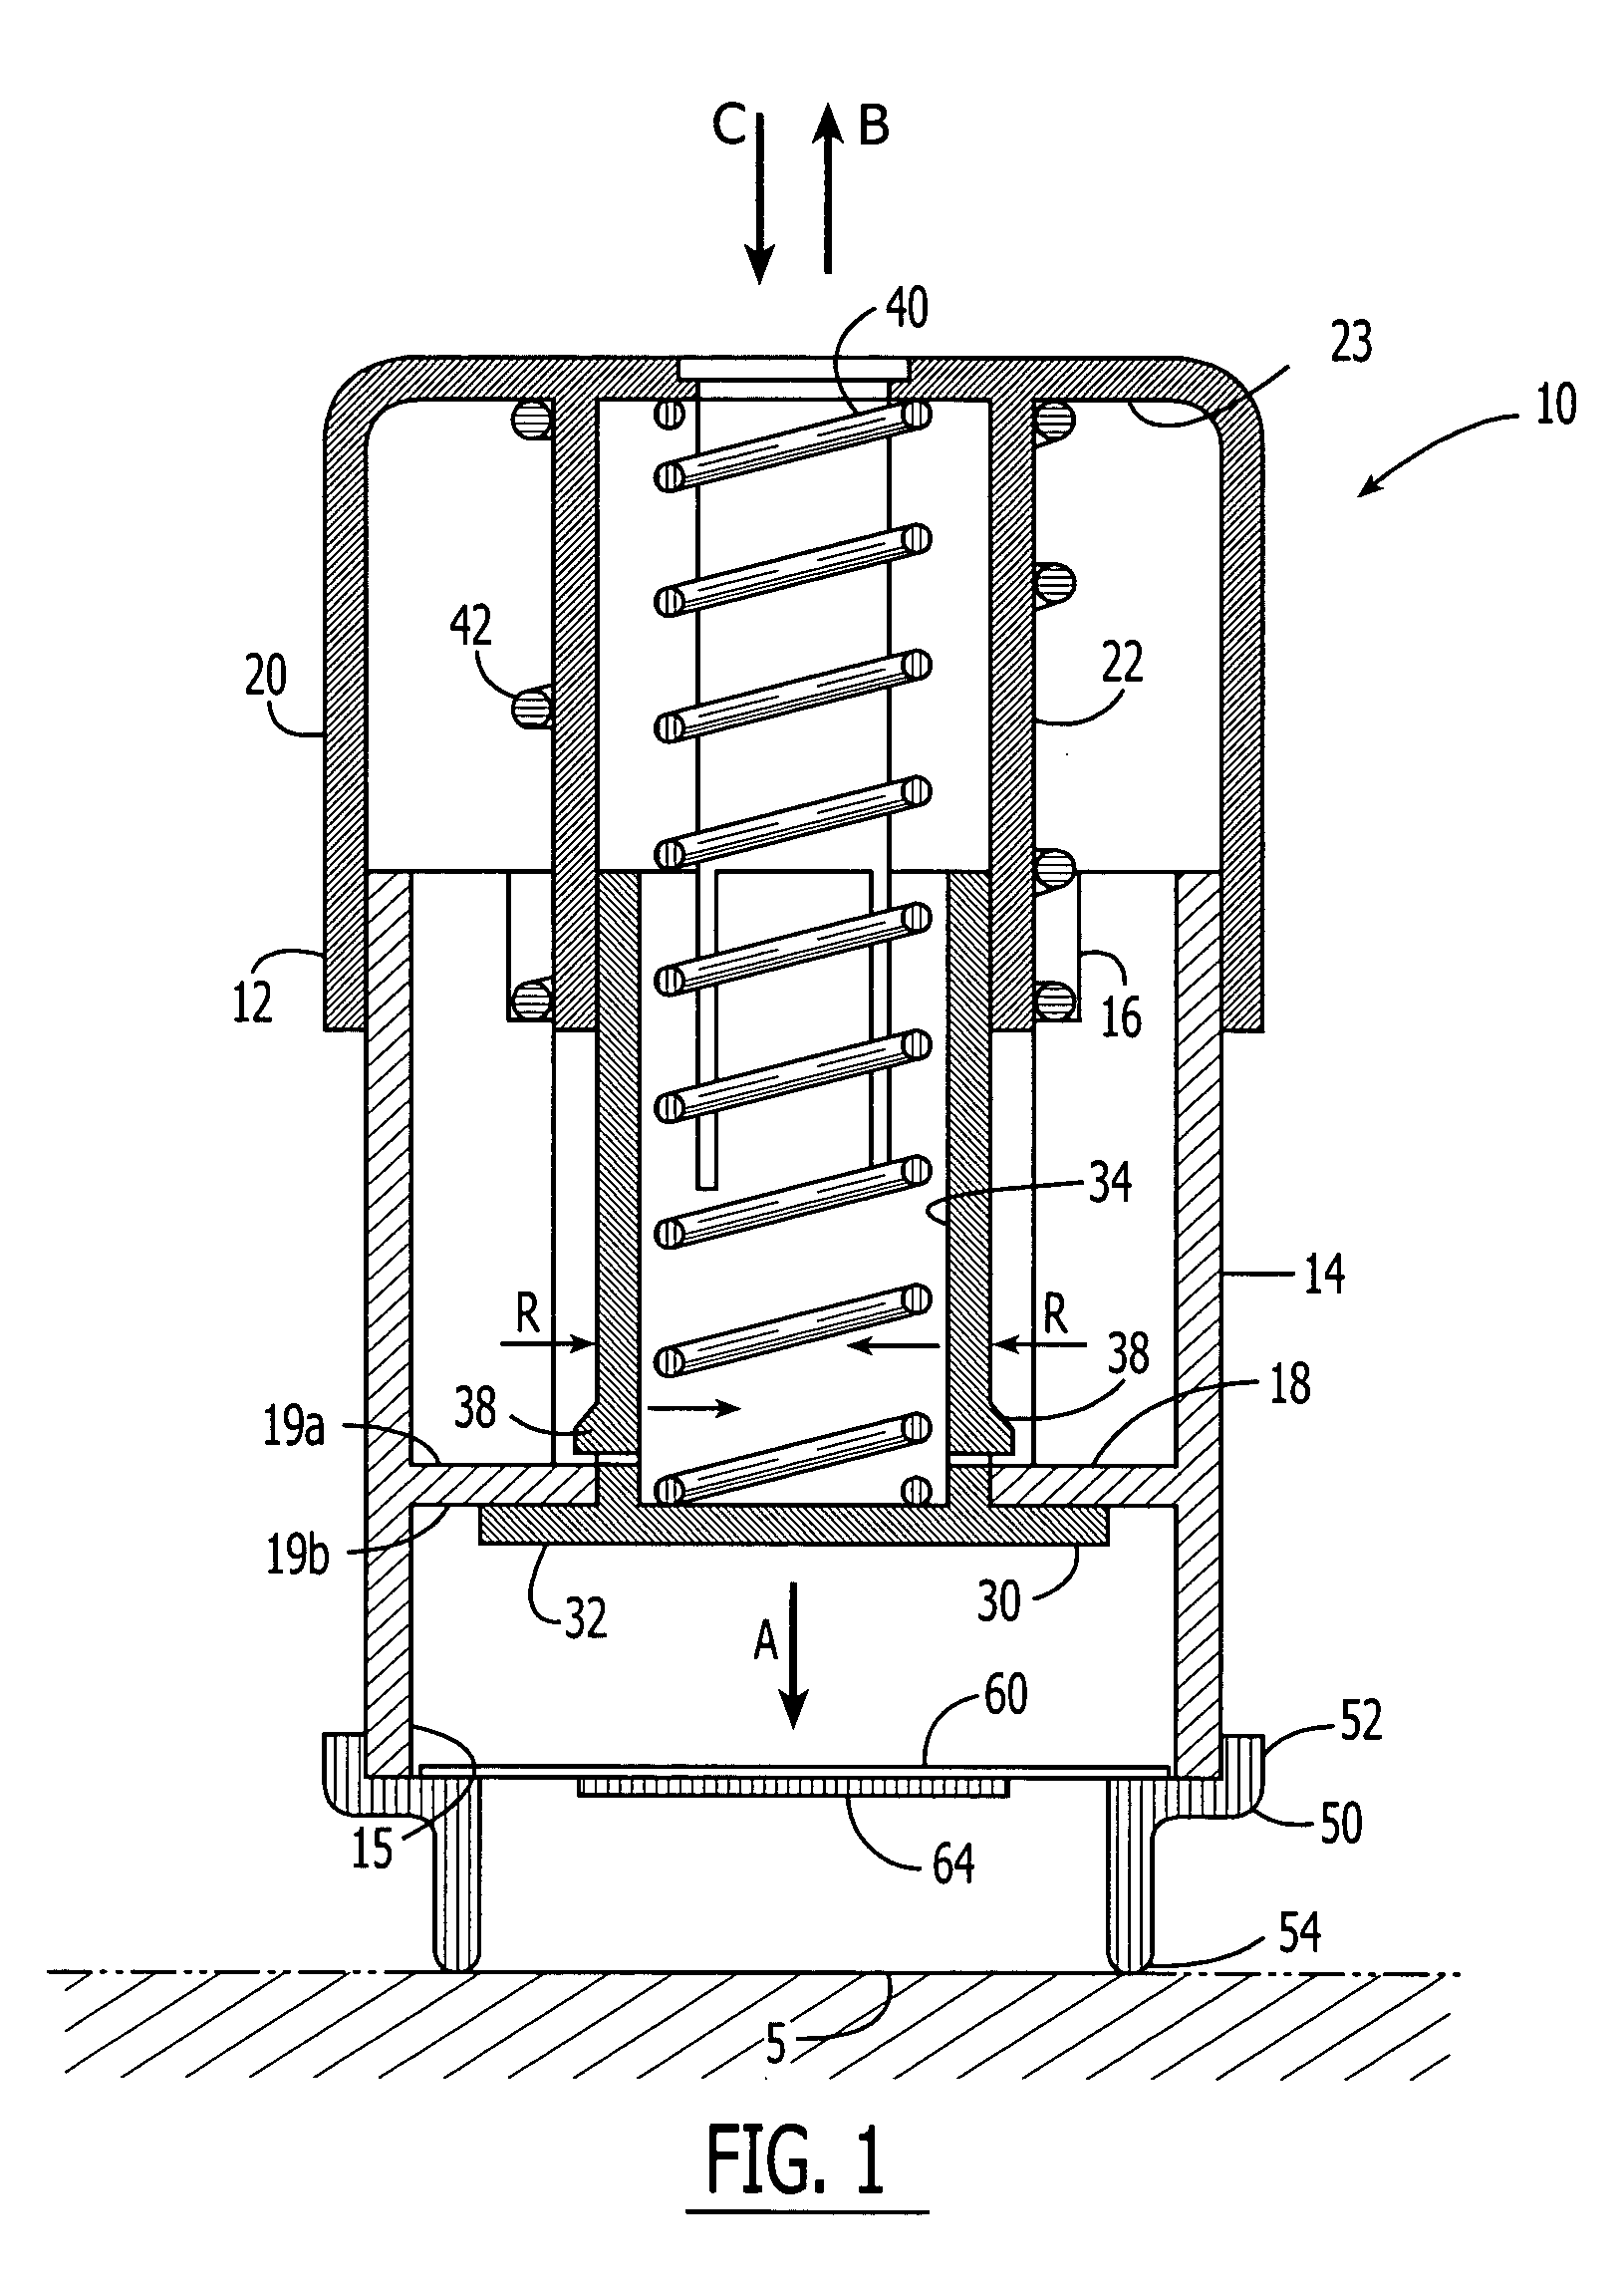 Self-actuating applicator for microprojection array